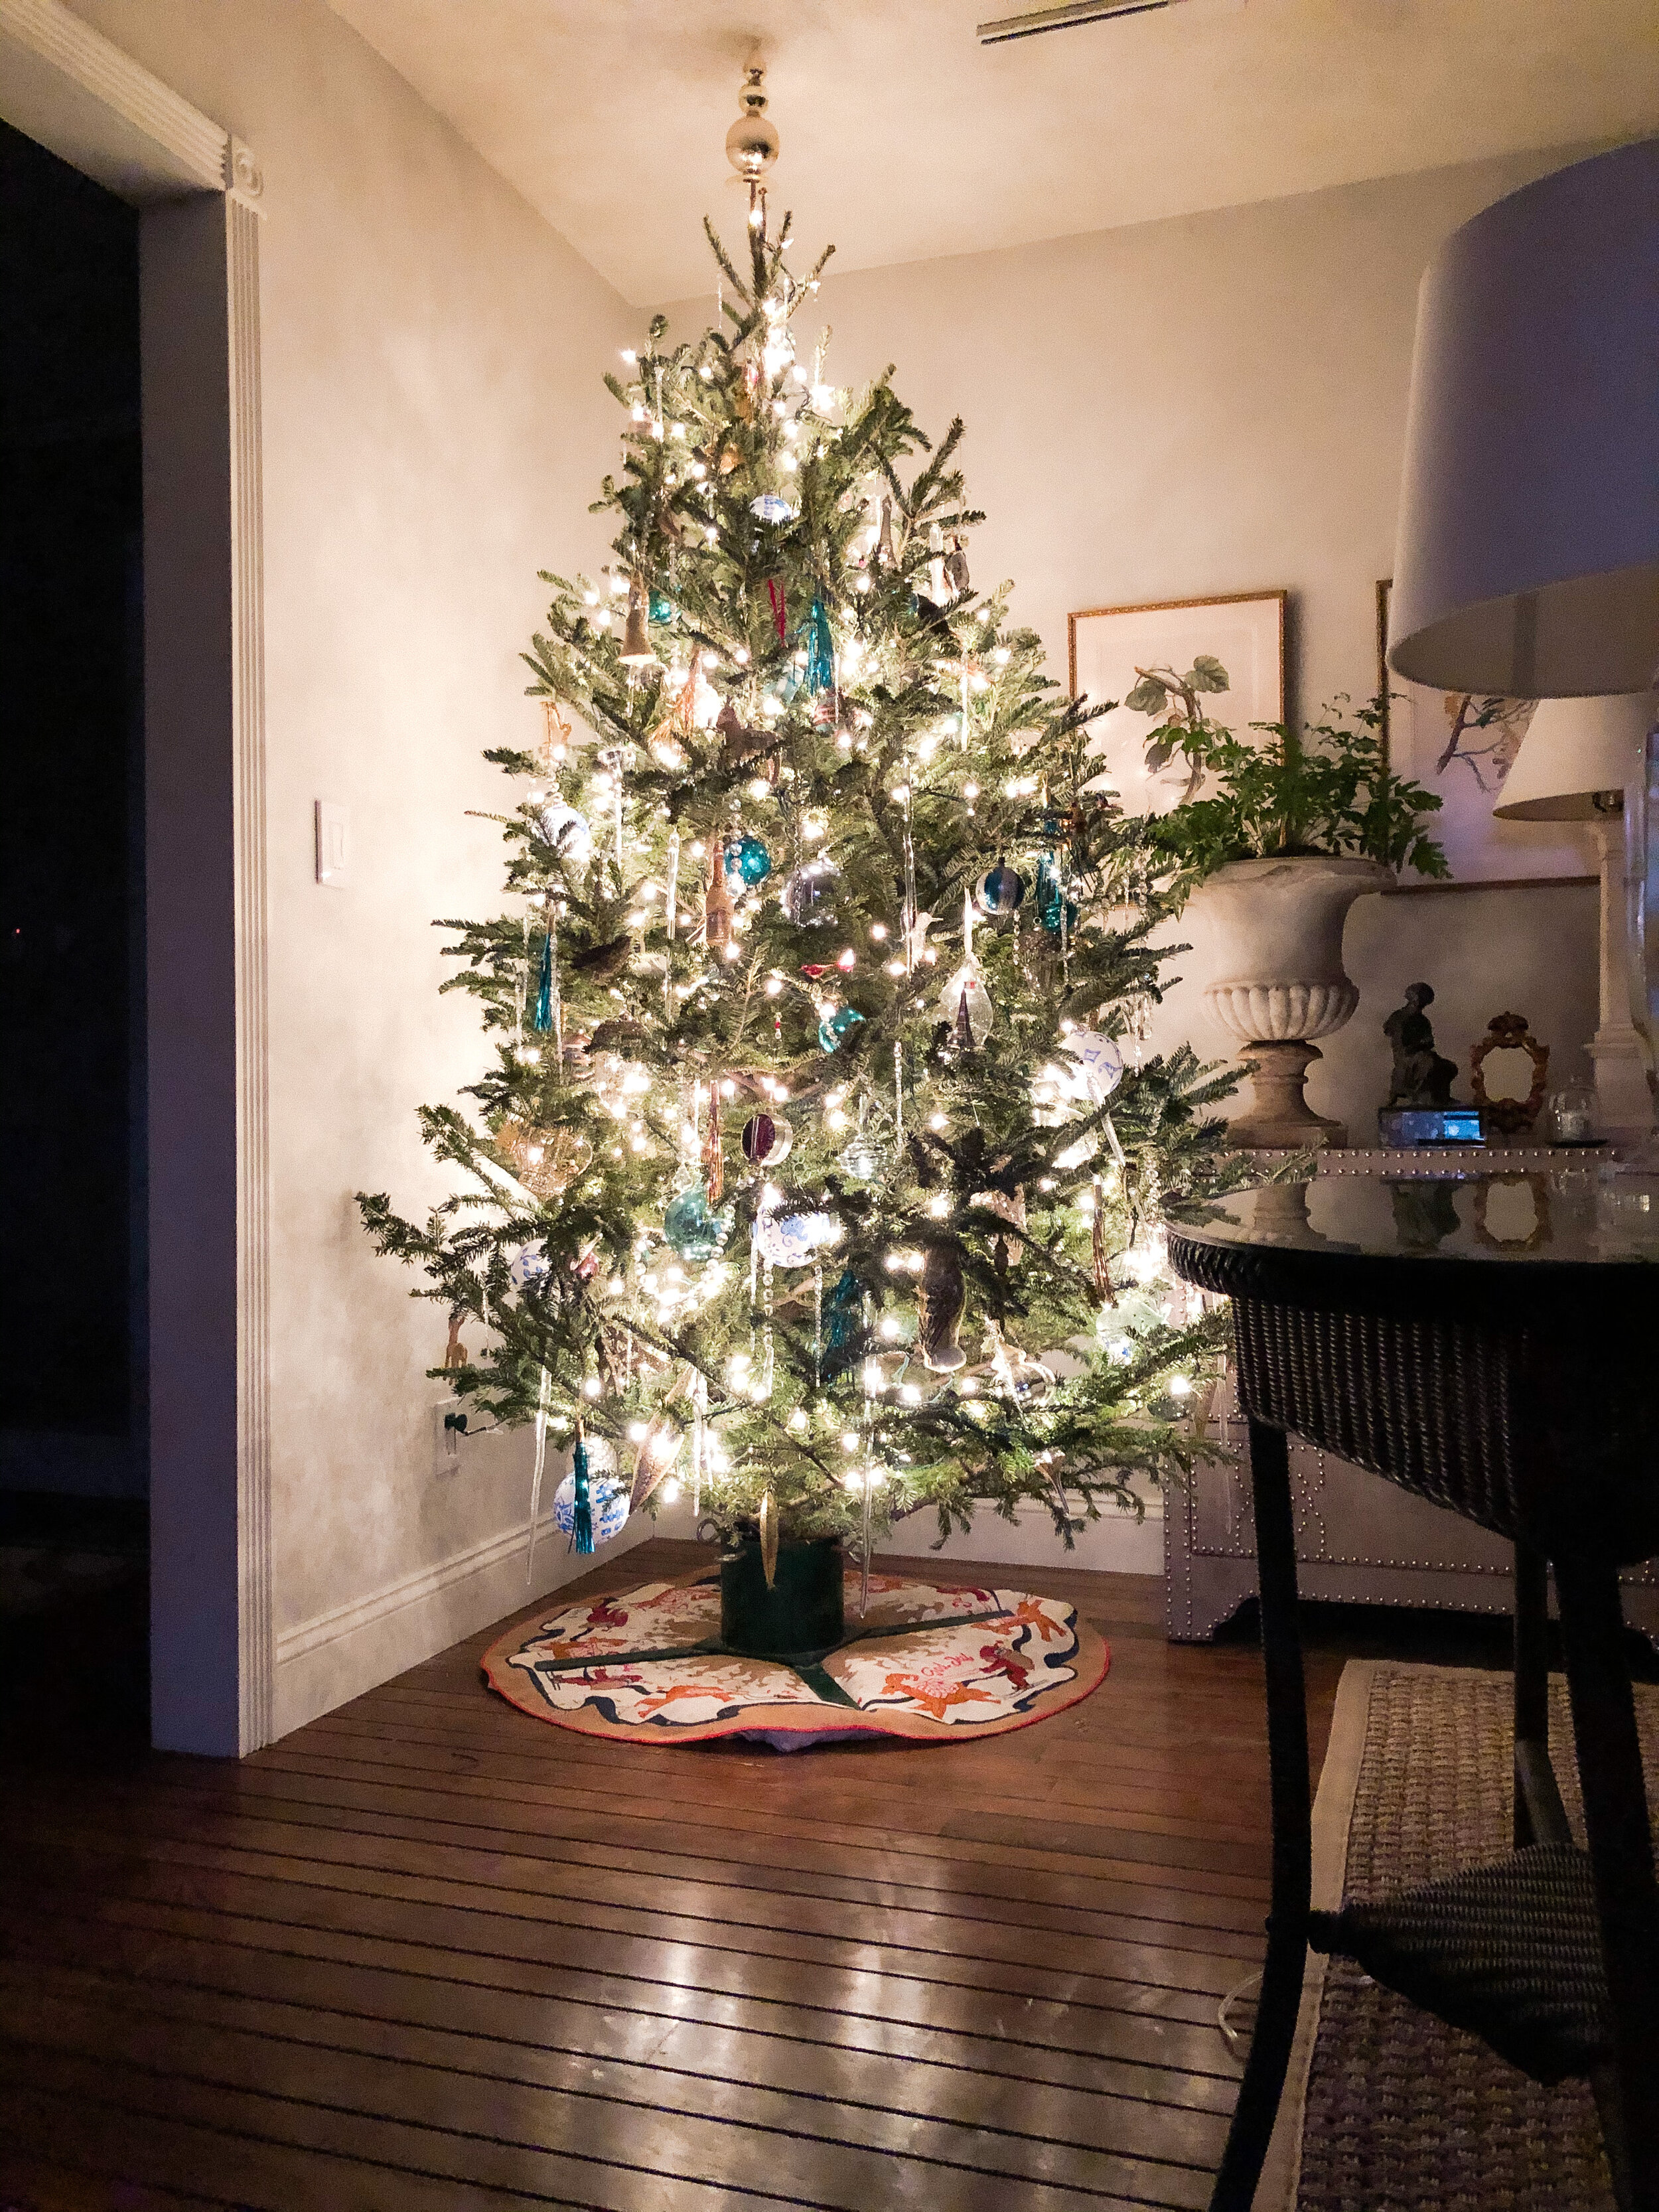 Our pretty tree with a mix of vintage and new baubles sits atop a sentimental ‘God Jul’ Scandinavian tree skirt